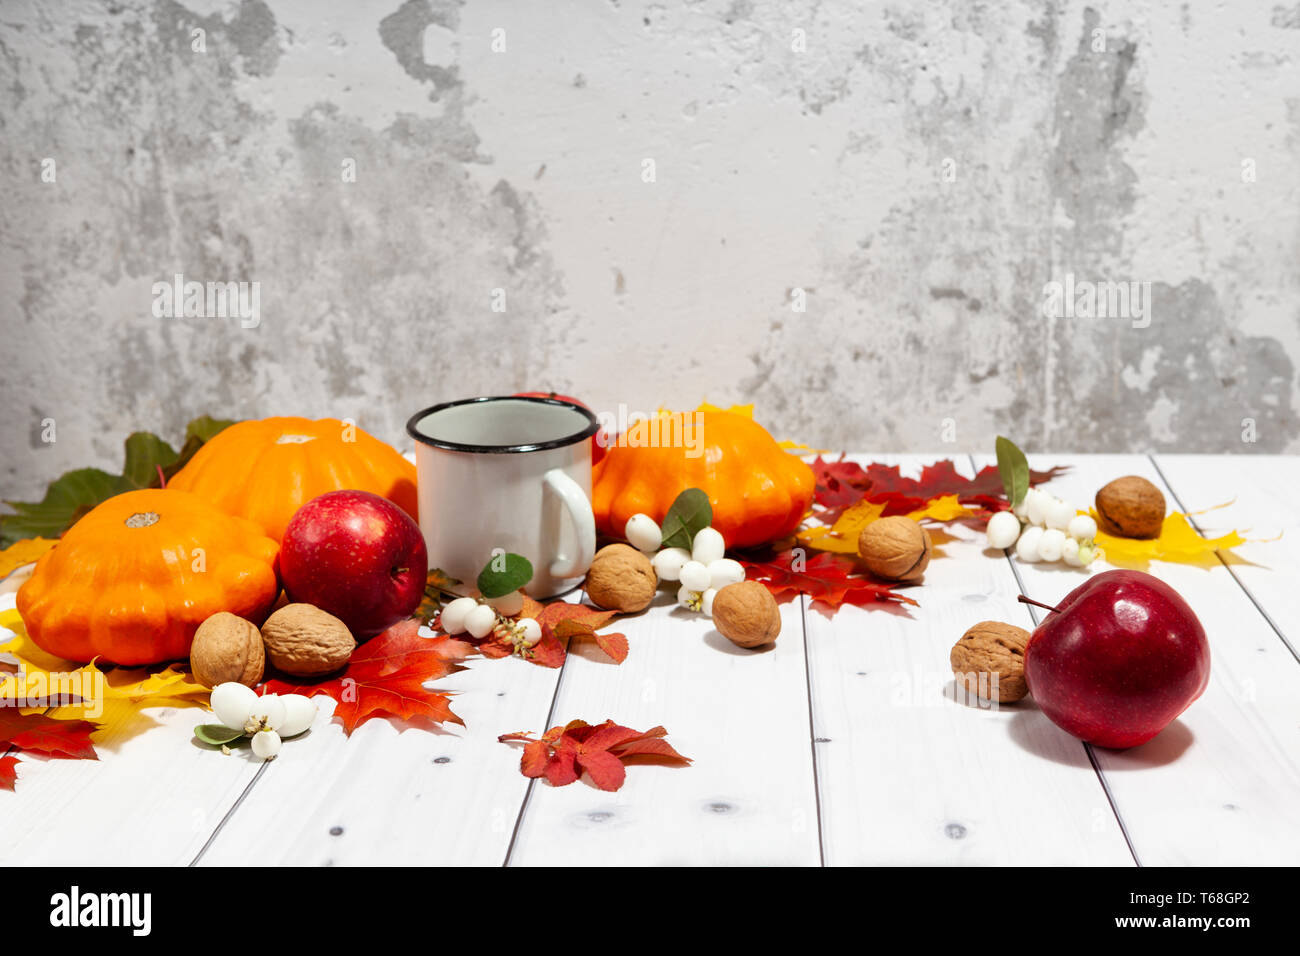 Autumn background with pumpkins and apples Stock Photo